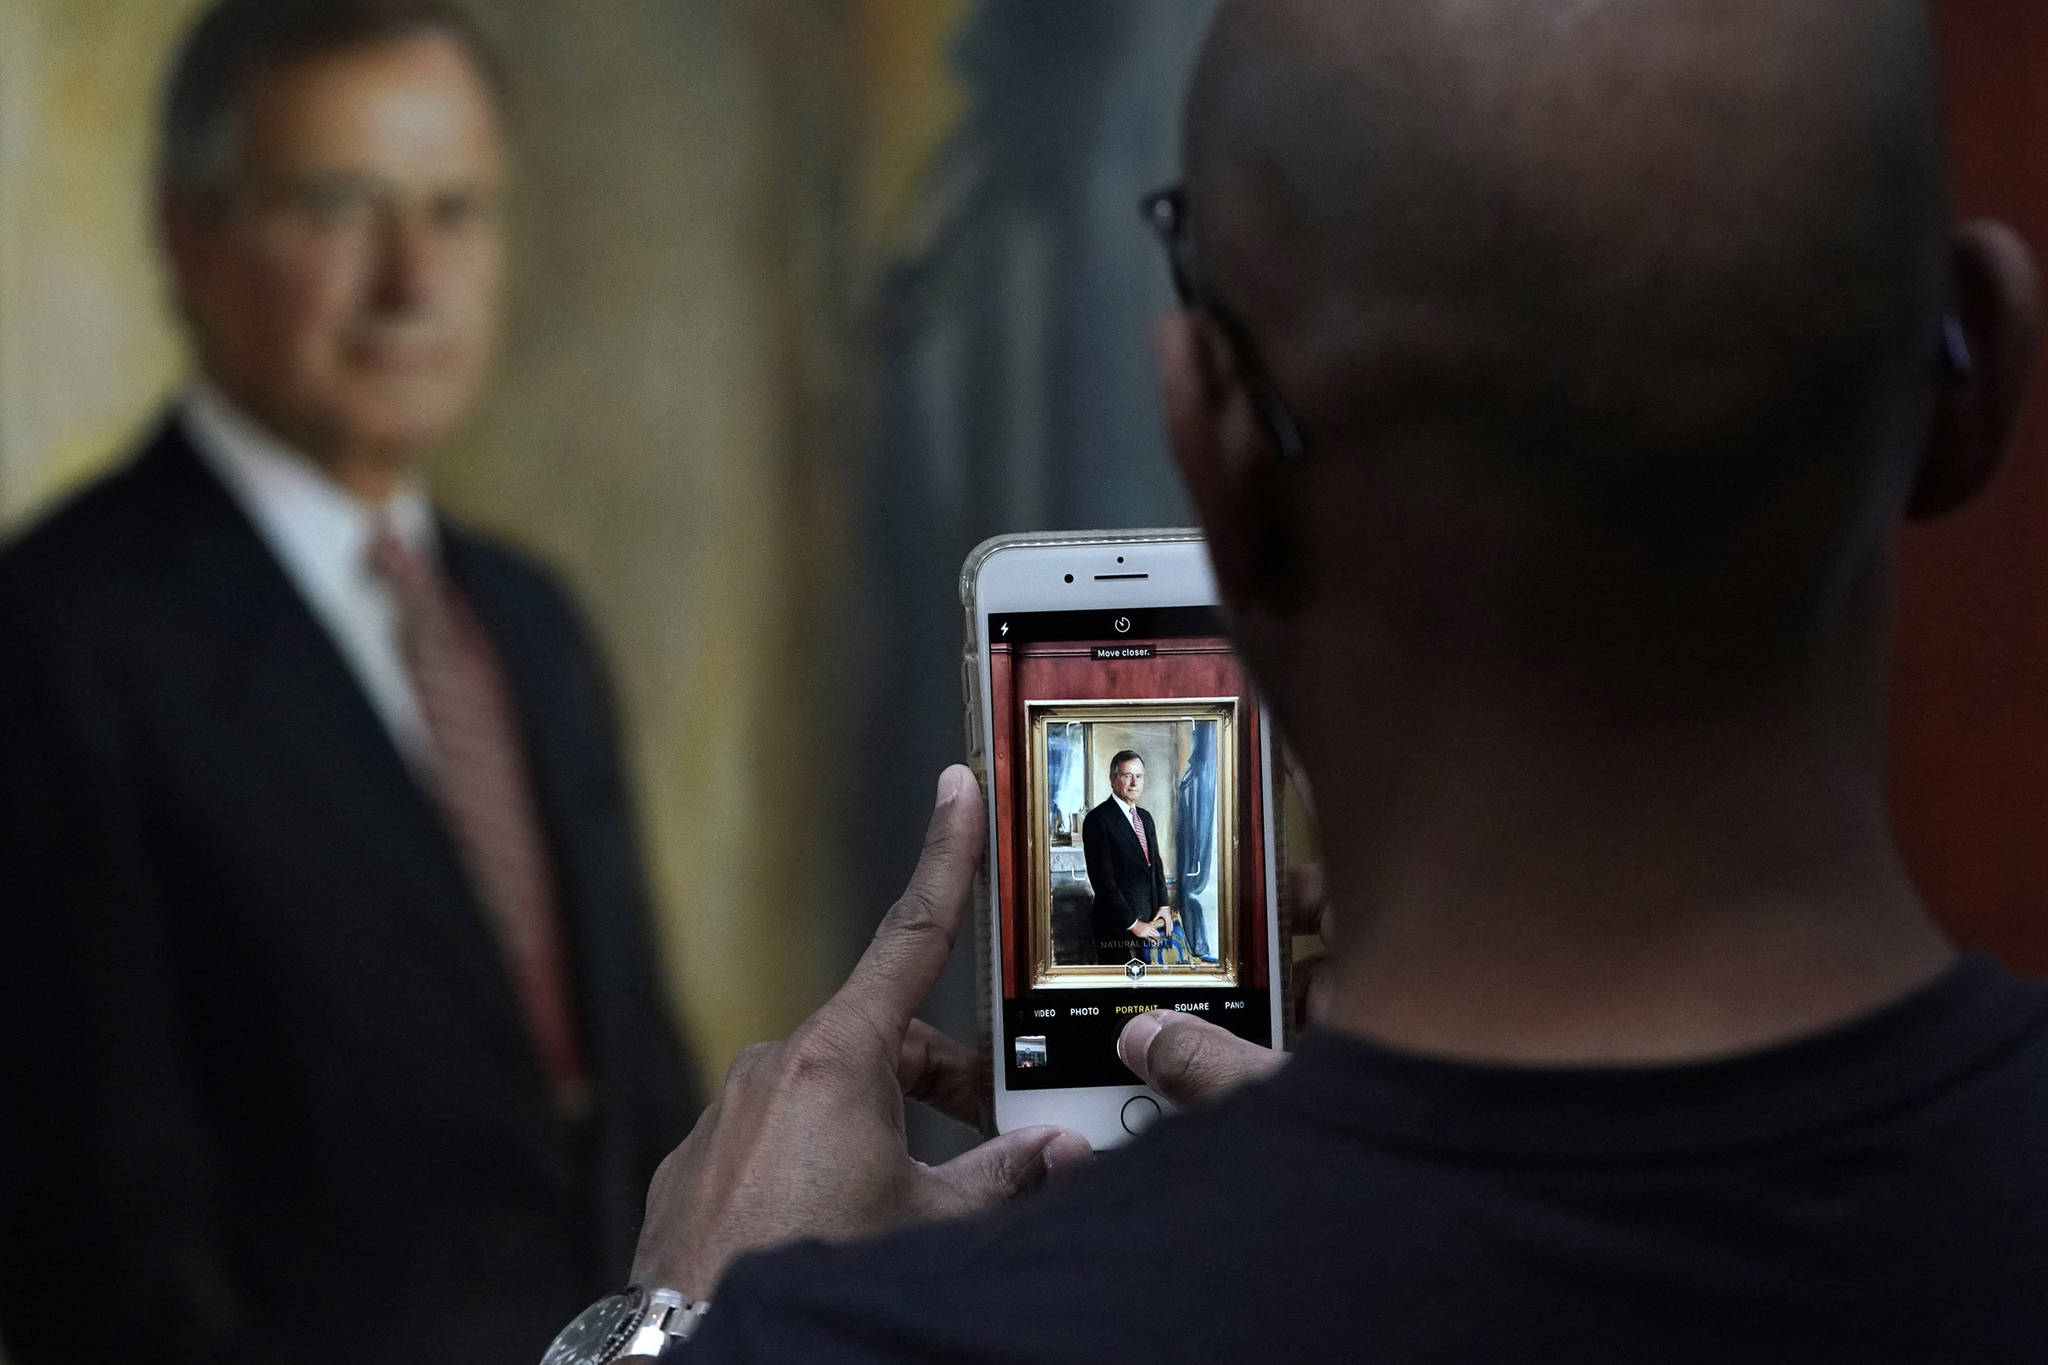 Ayman Tahir takes a photo of a painting of George H.W. Bush inside the George H.W. Bush Library and Museum Saturday, Dec. 1, 2018, in College Station. Bush has died at age 94. Family spokesman Jim McGrath says Bush died shortly after 10 p.m. Friday, Nov. 30, 2018, about eight months after the death of his wife, Barbara Bush. (David J. Phillip | Associated Press)